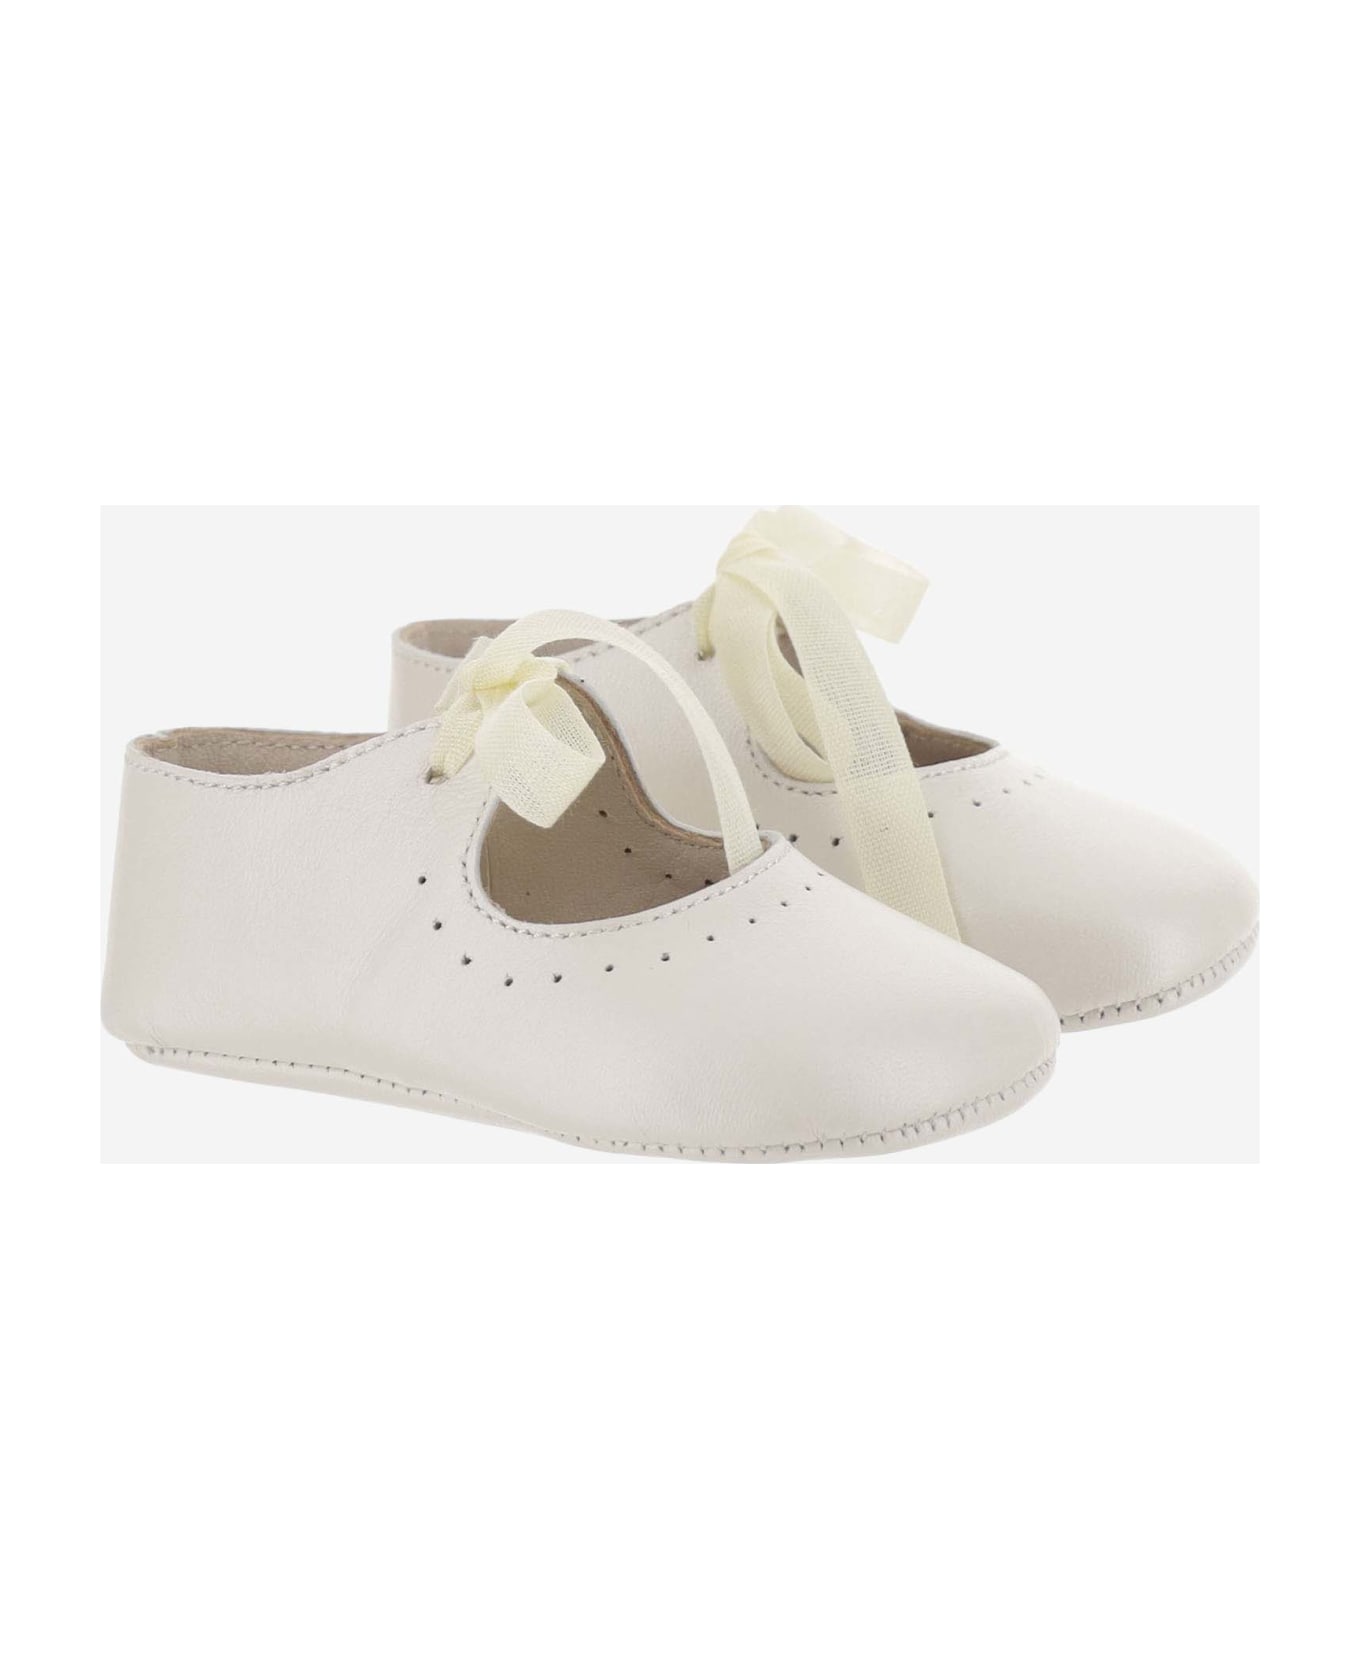 Bonpoint Nappa Leather Shoes With Bow - White